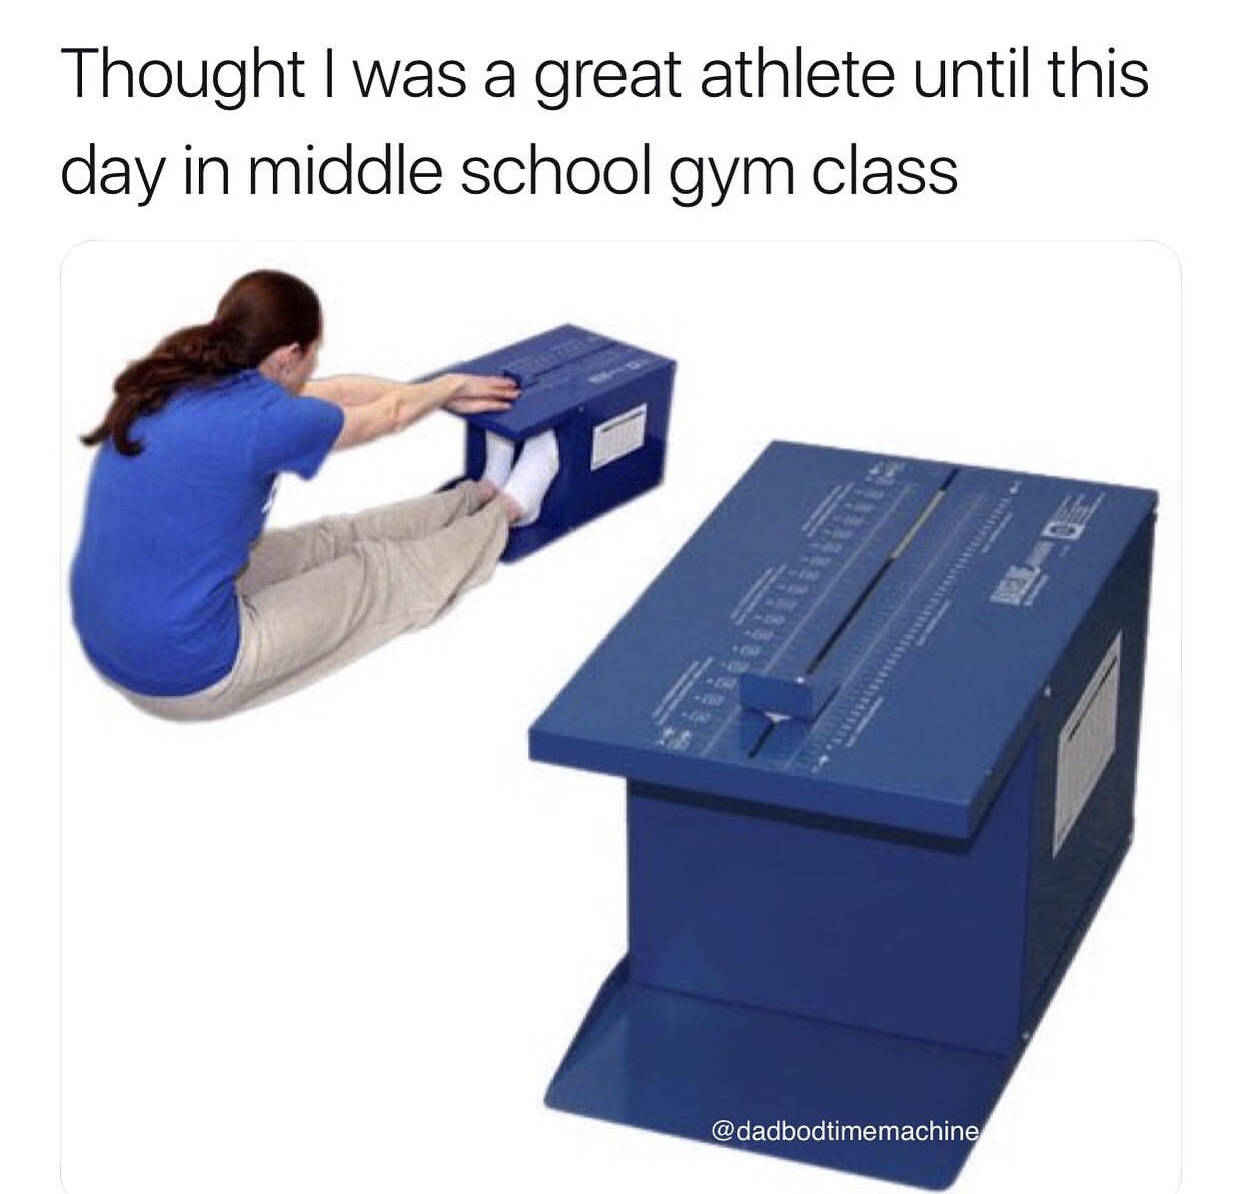 sit and reach - Thought I was a great athlete until this day in middle school gym class